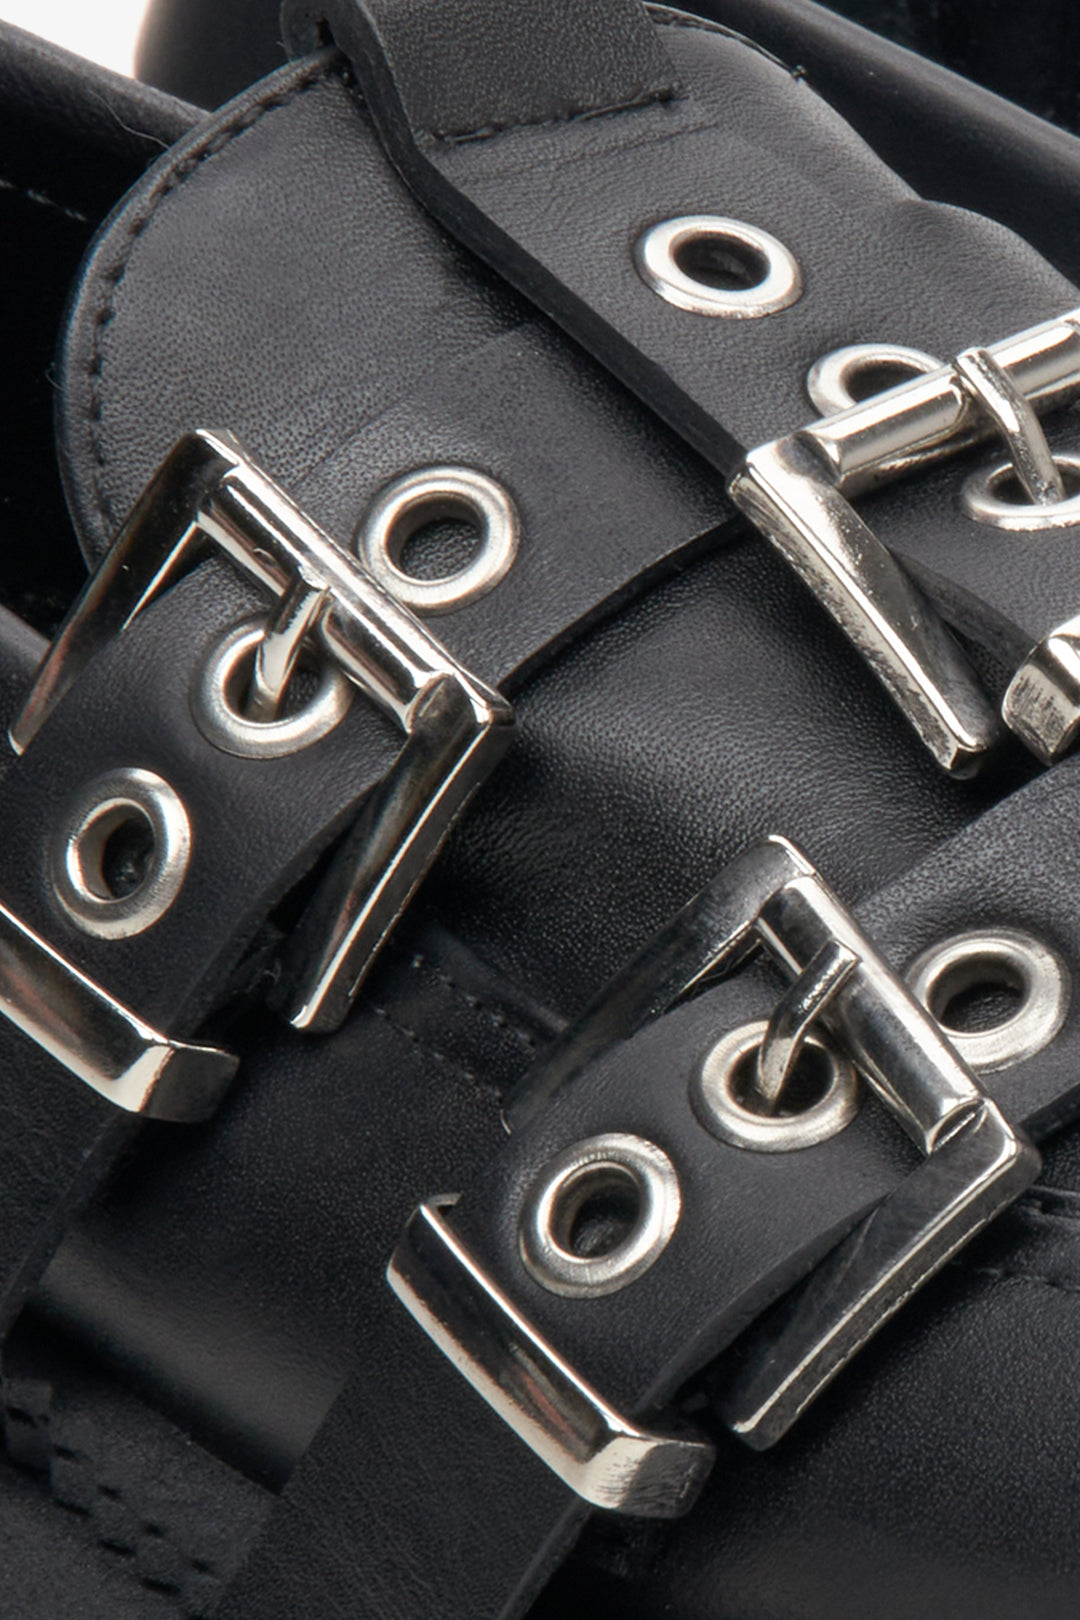 Women's black leather loafers by Estro with decorative buckles - close-up on details.